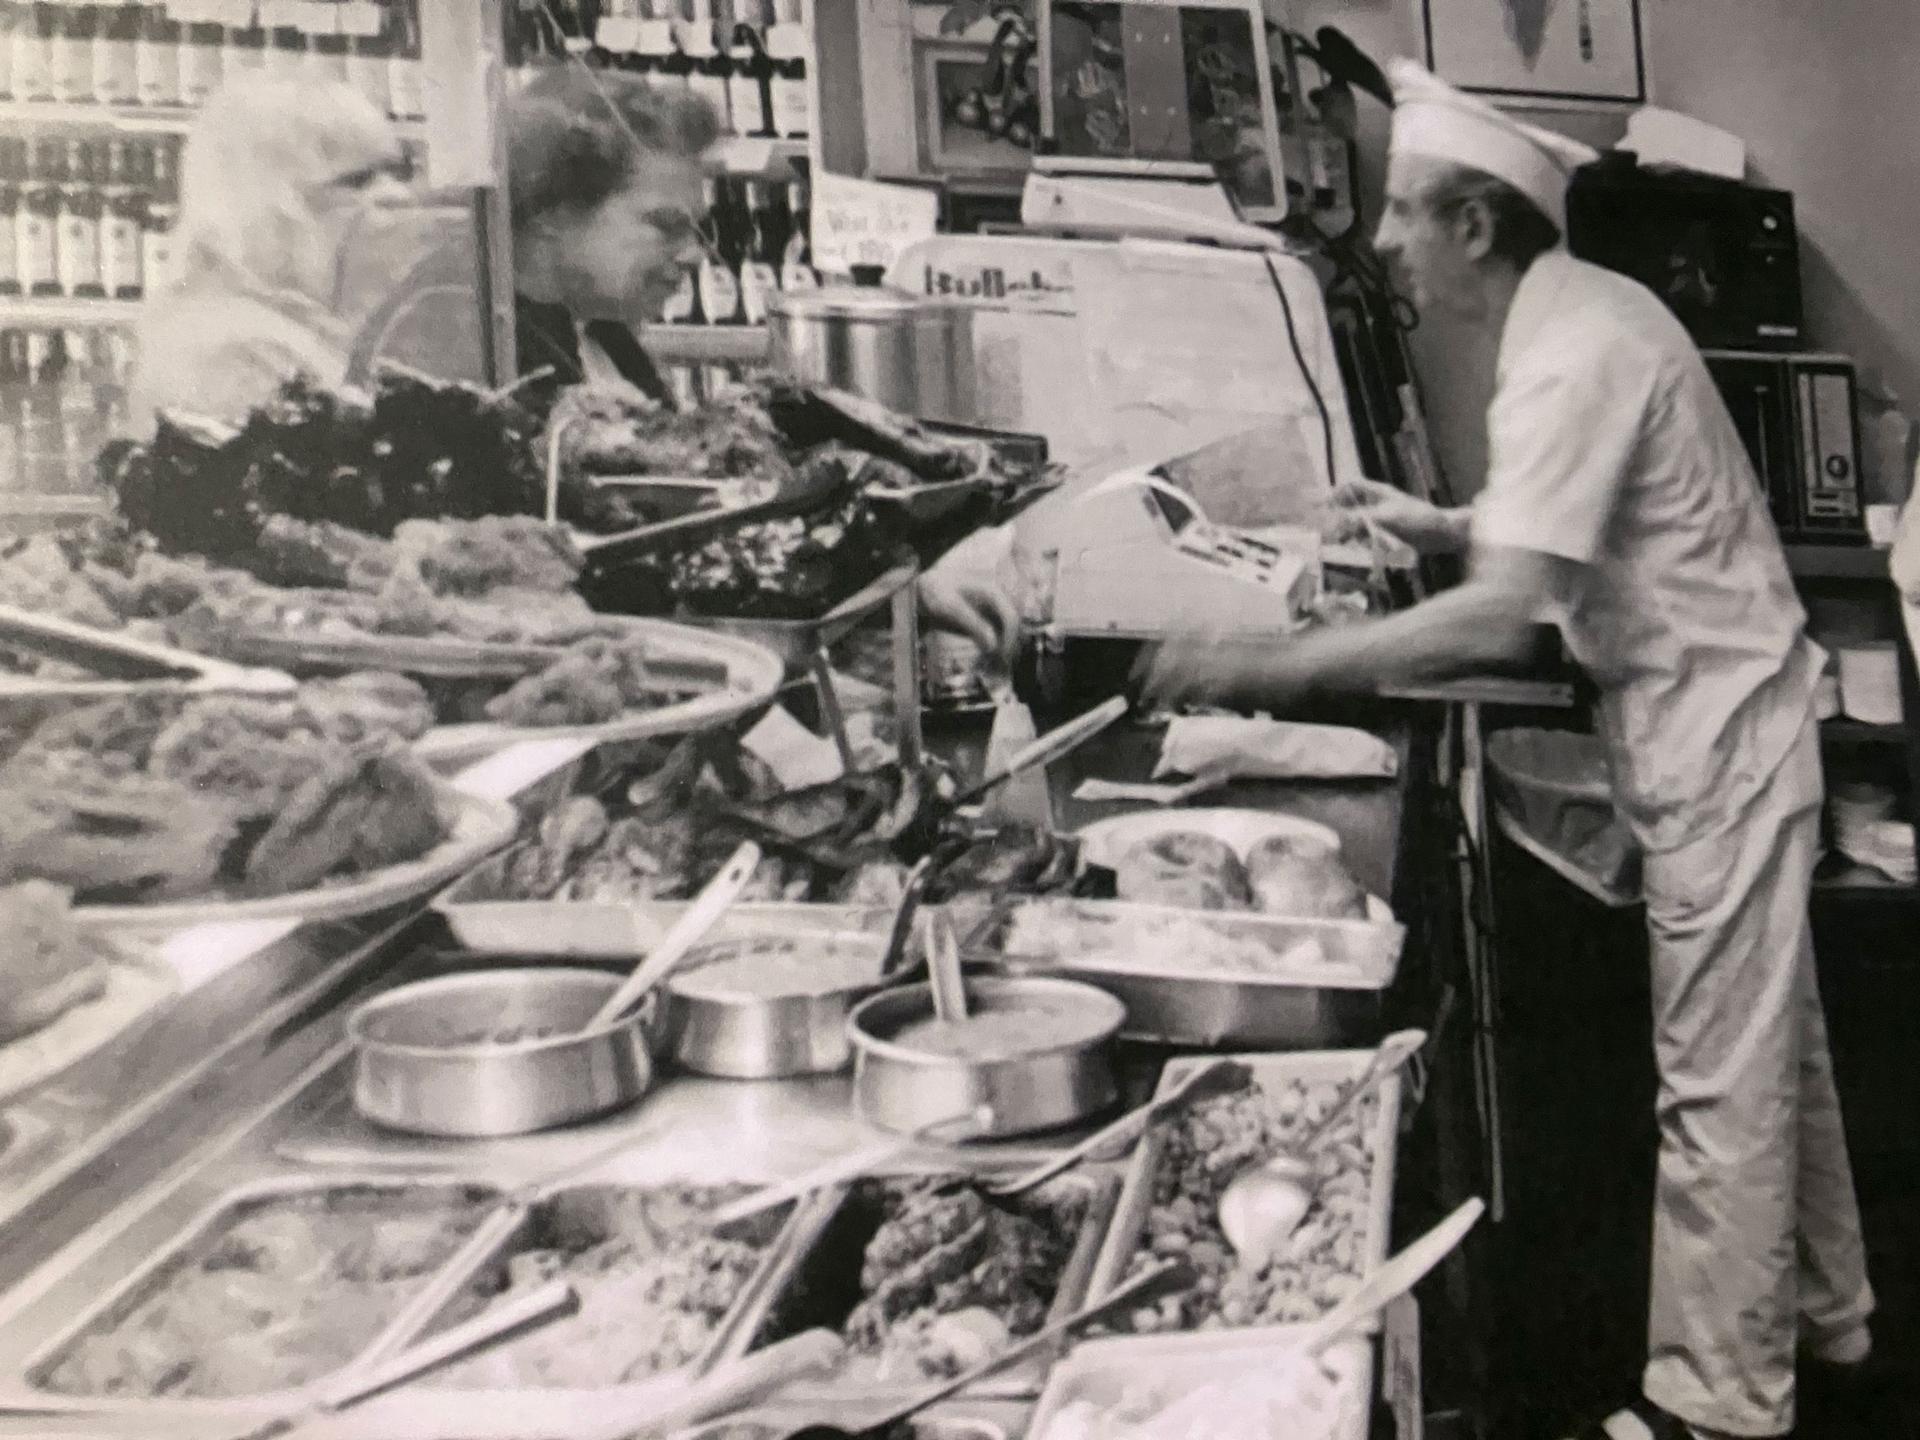 One long wall of the exhibit features portraits and photos of deli workers and owners in action behind the counter, serving discerning customers.